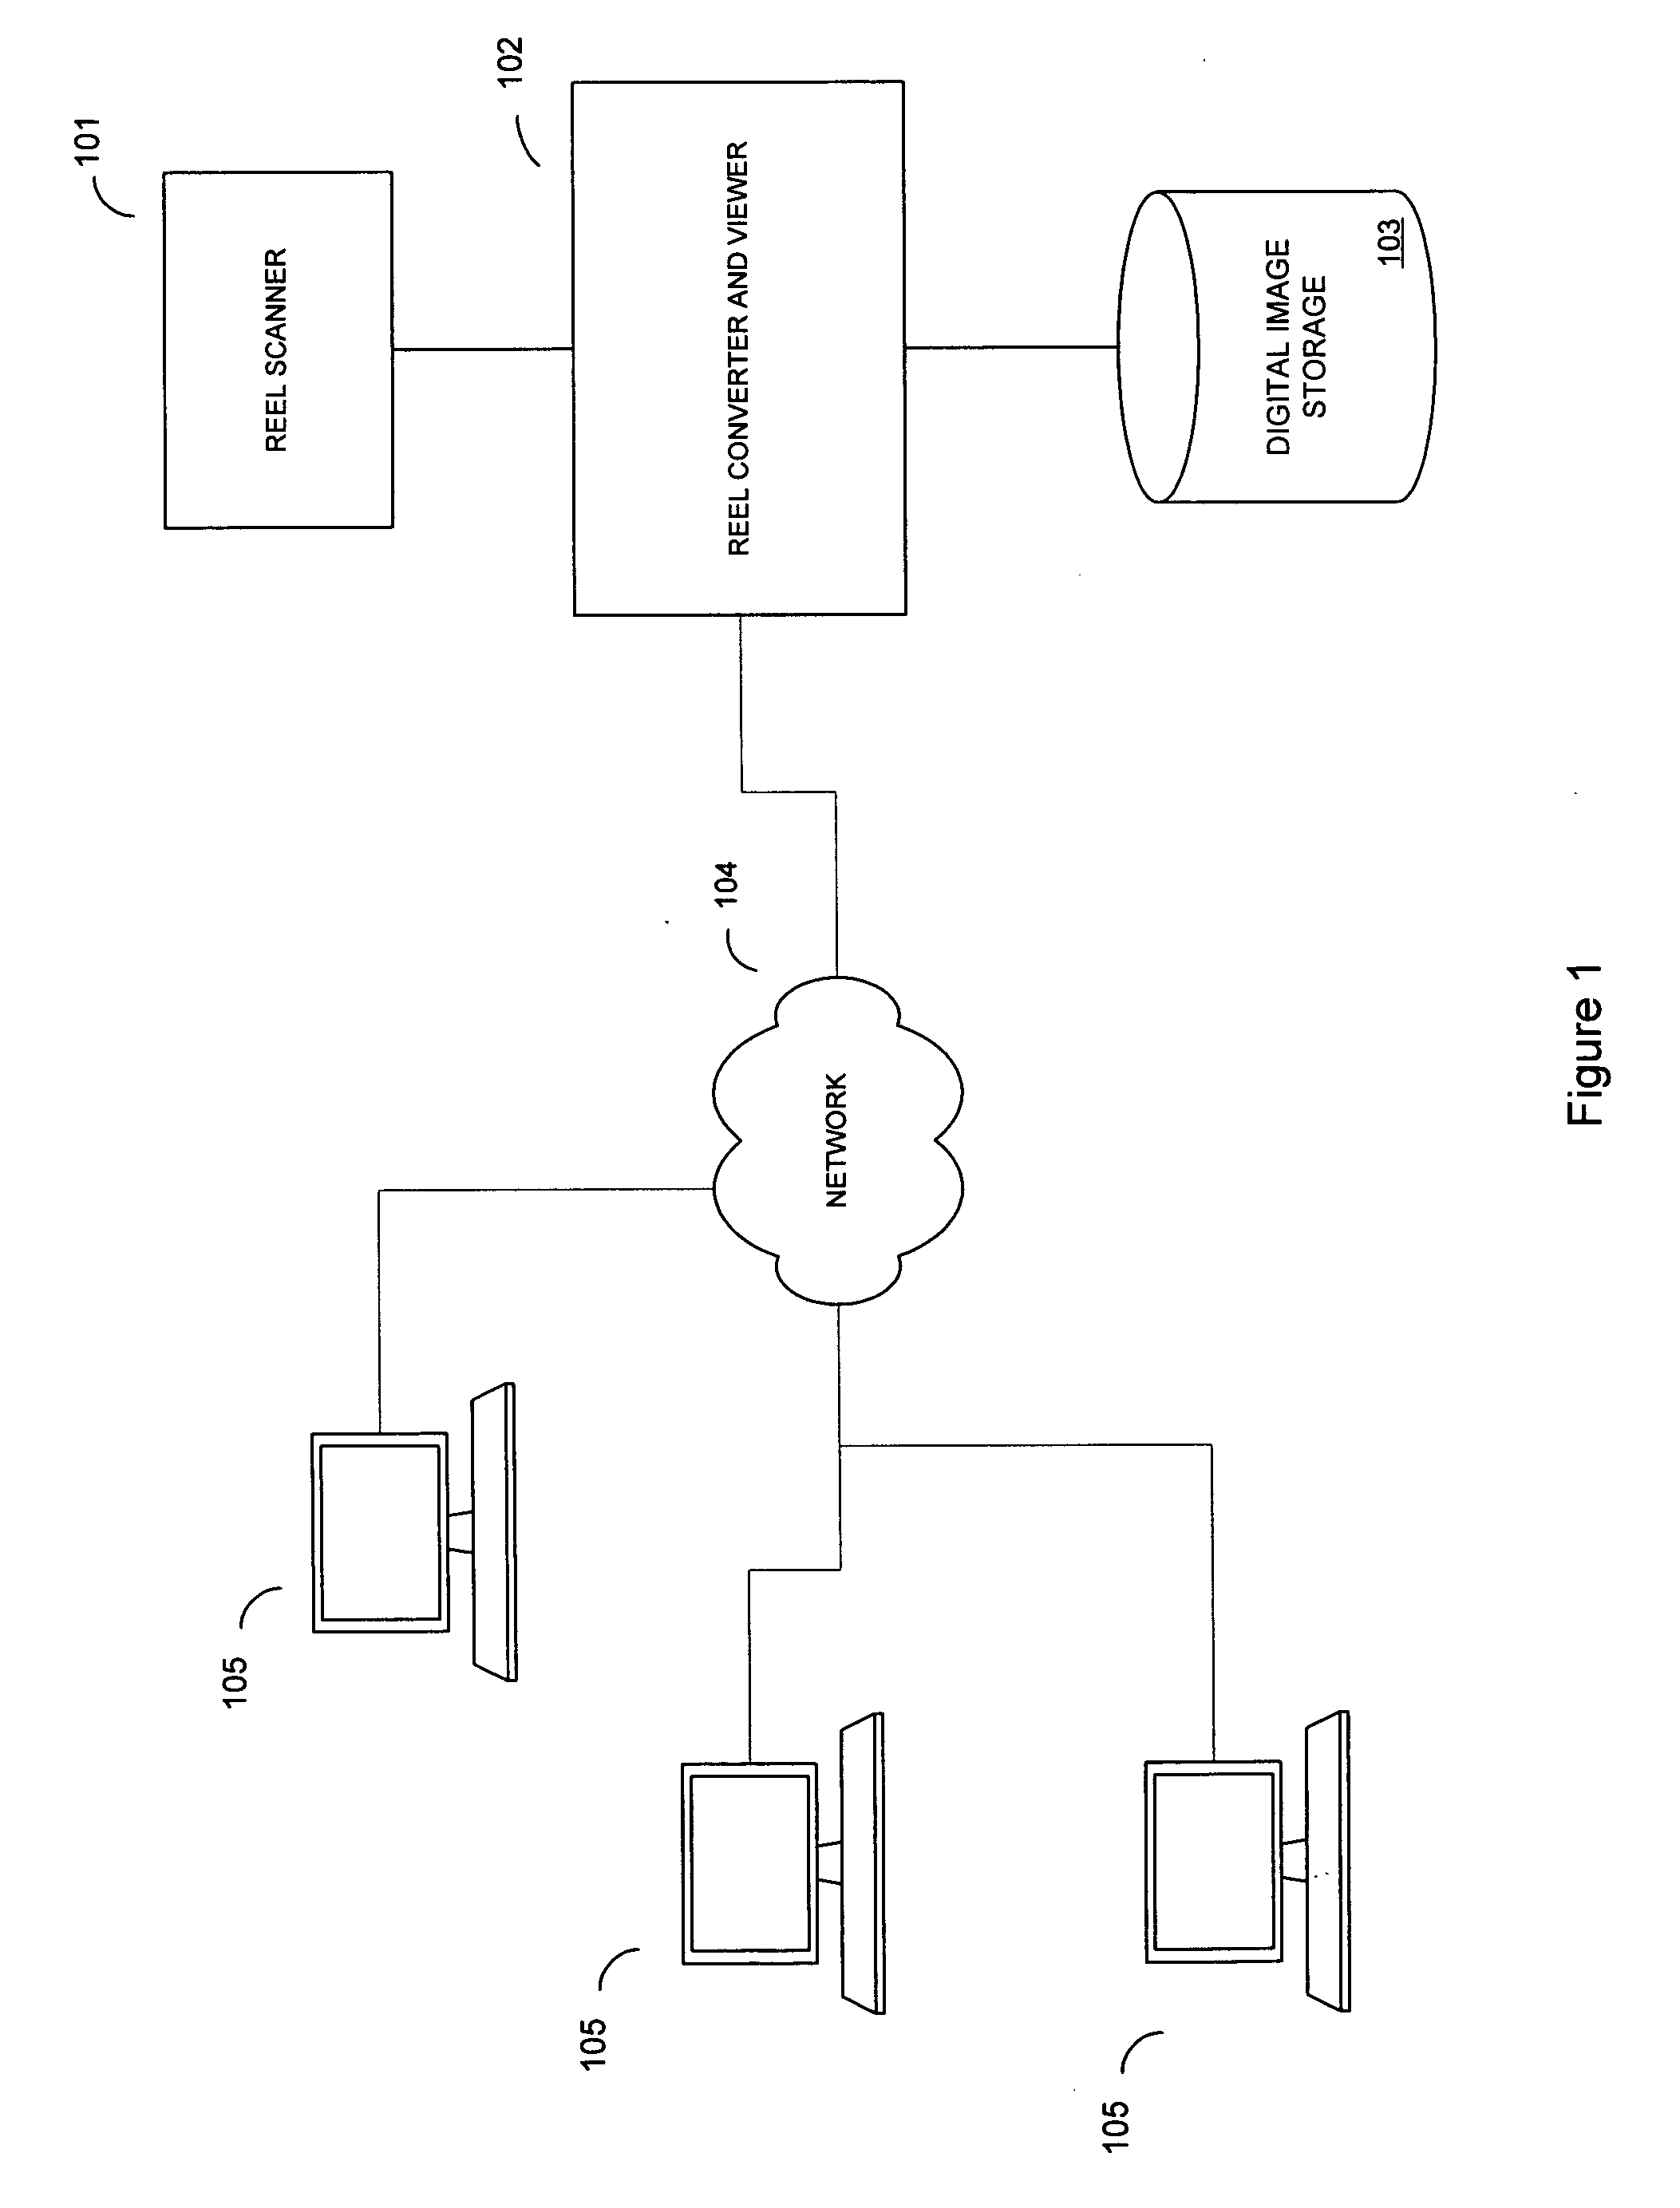 Method and system of viewing digitized roll film images